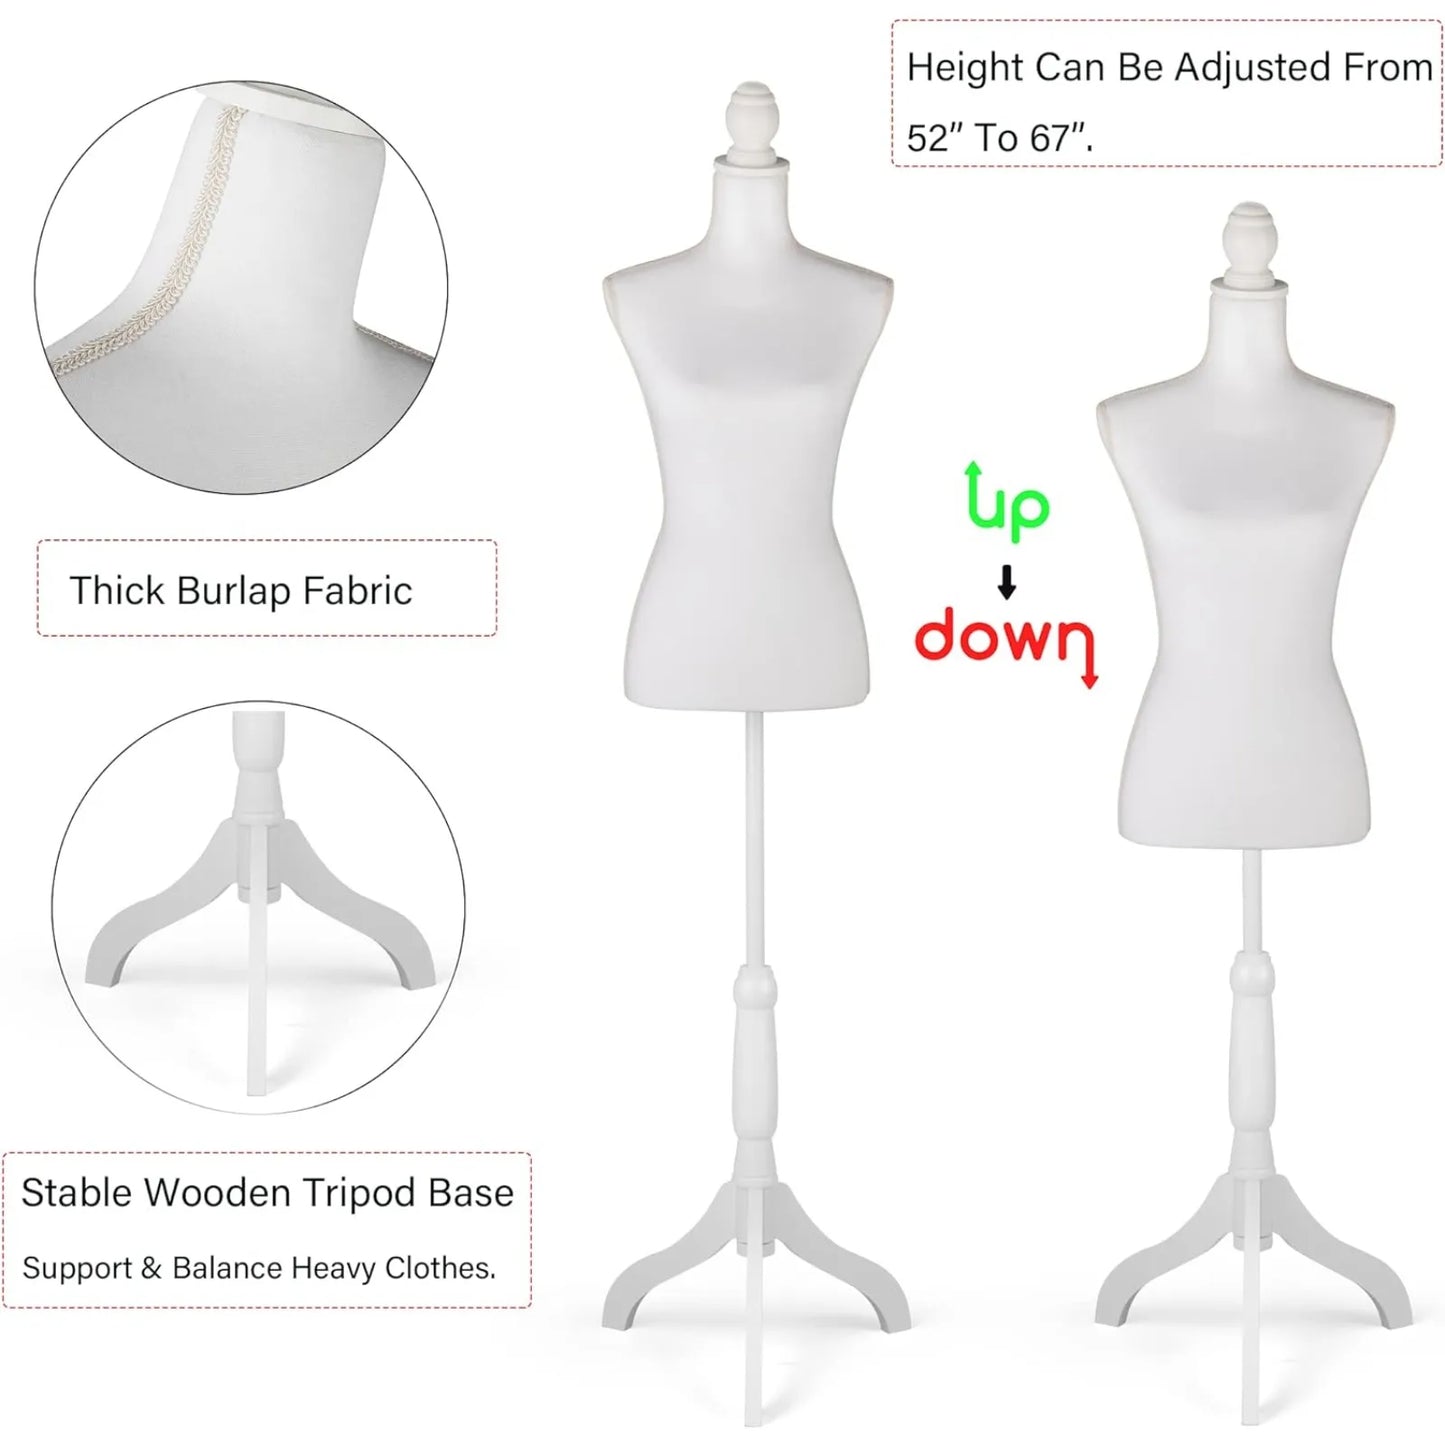 Female Mannequin Body/Torso, Adjustable with Stand